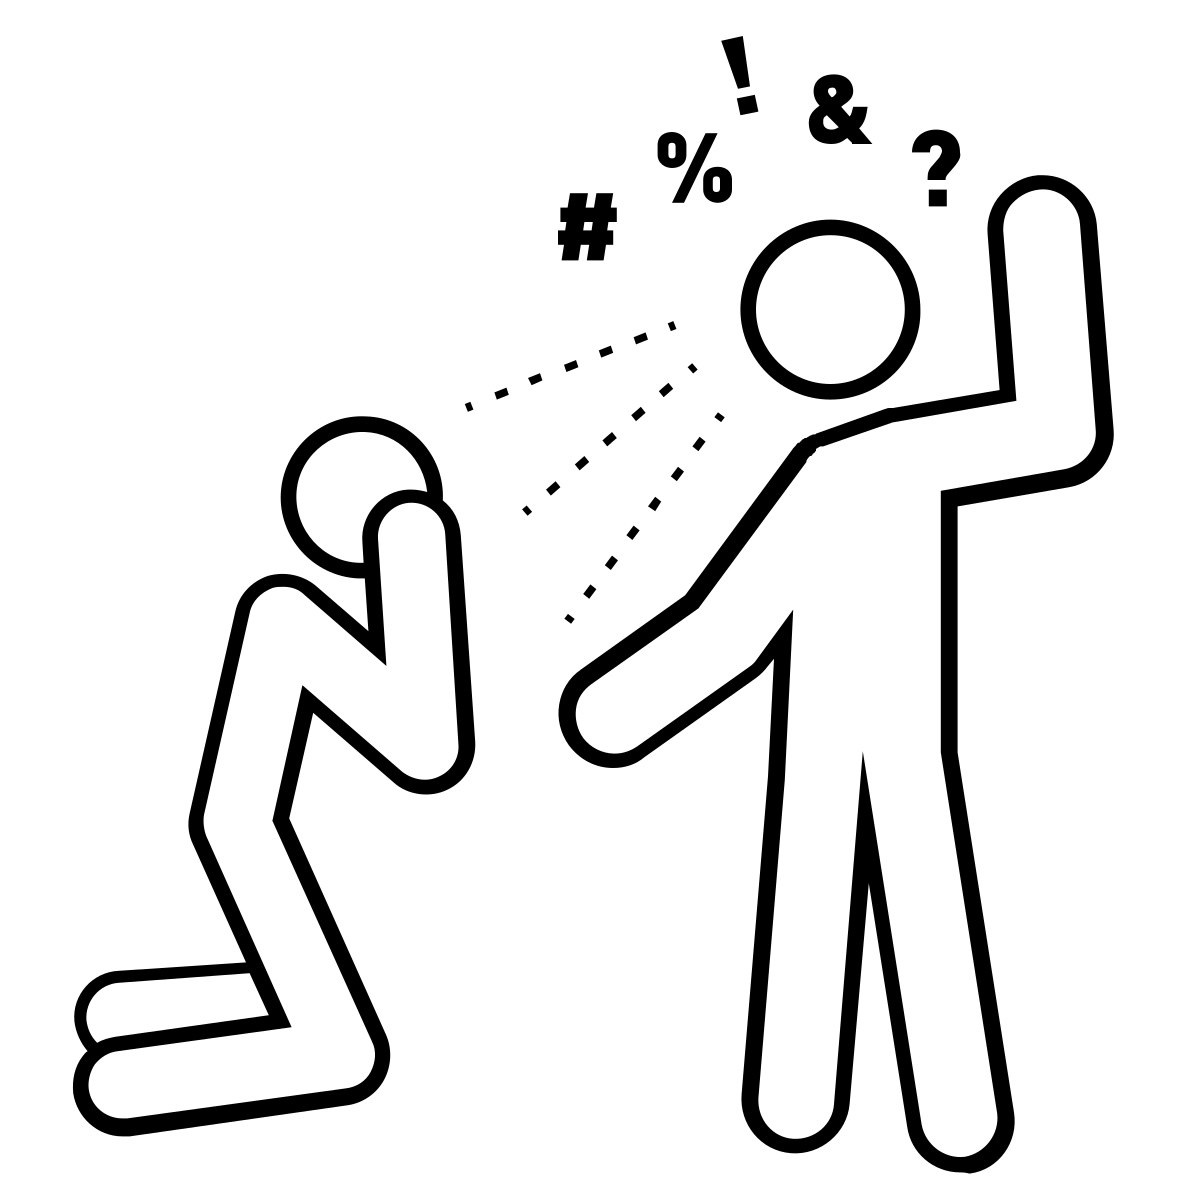 Icon of a person being assaulted by another person